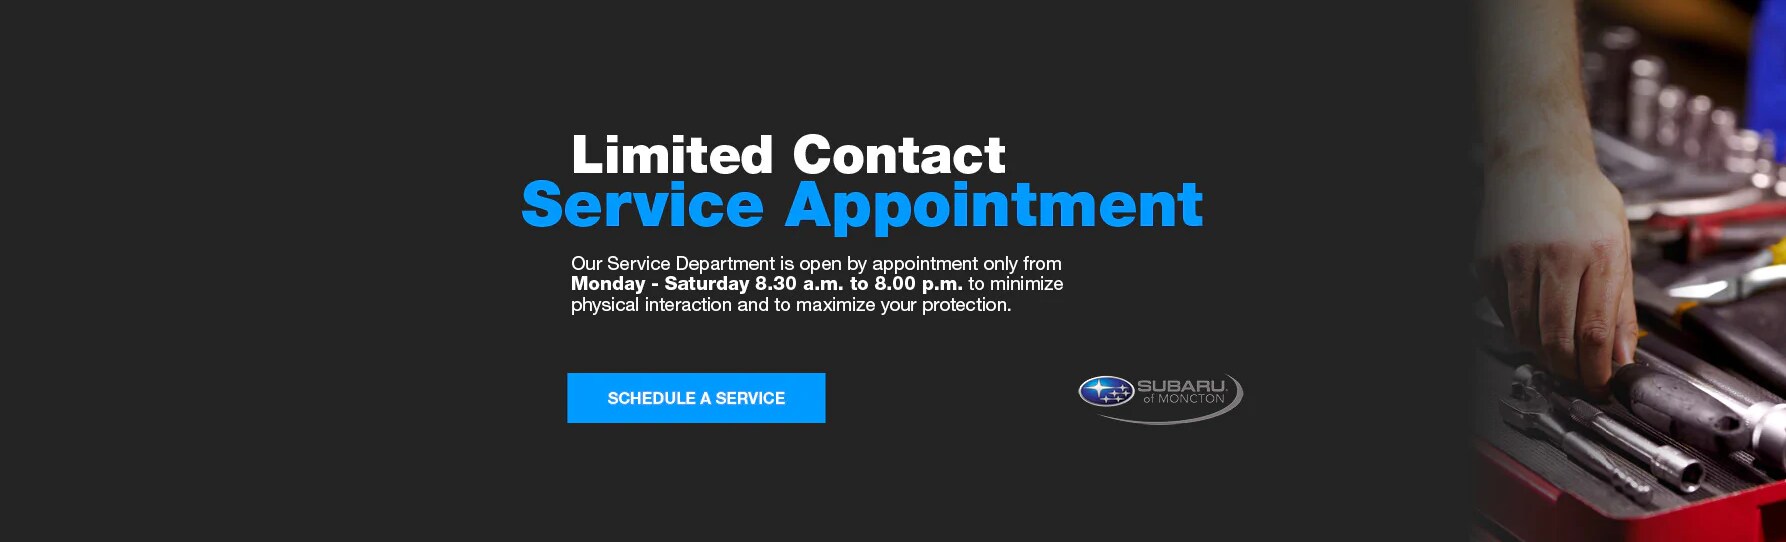 Limited Contact Service - Subaru of Moncton